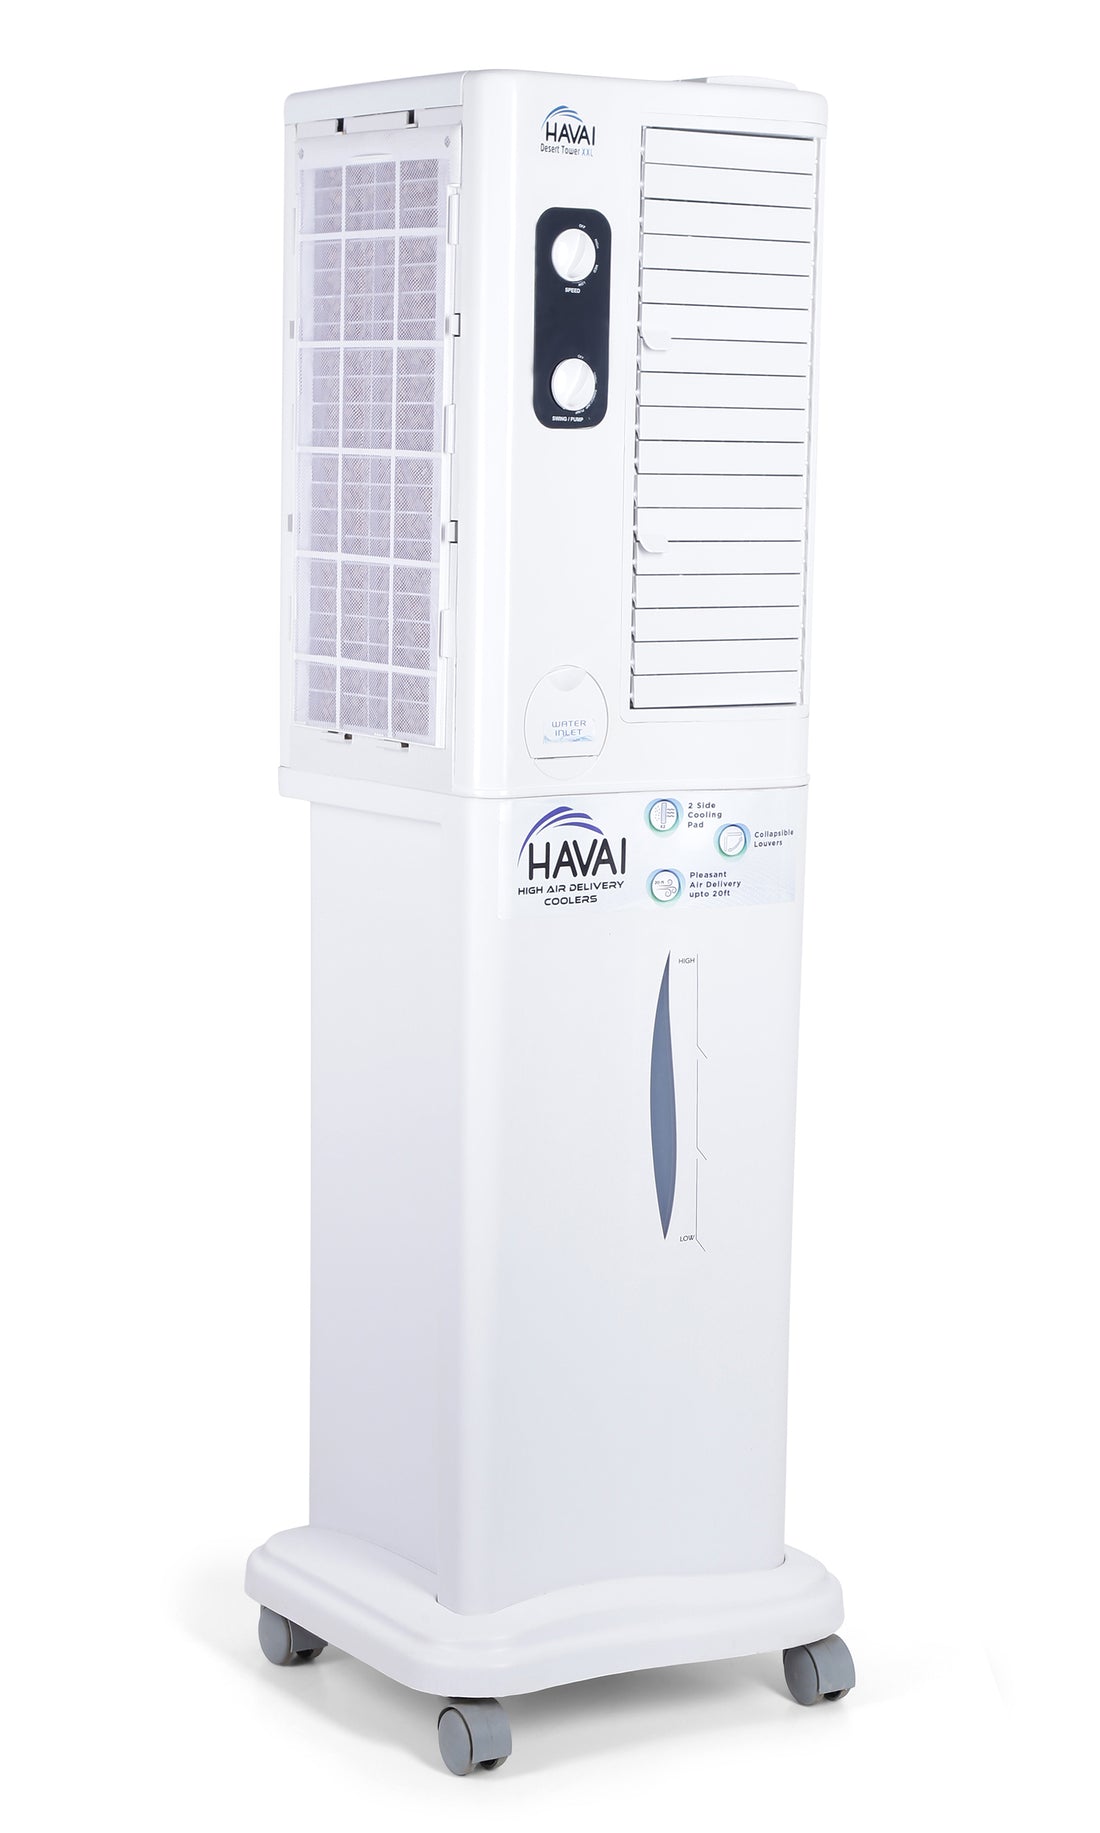 HAVAI Desert Tower XXL Cooler with Powerful Vertical ABS Blower - 60 L, White